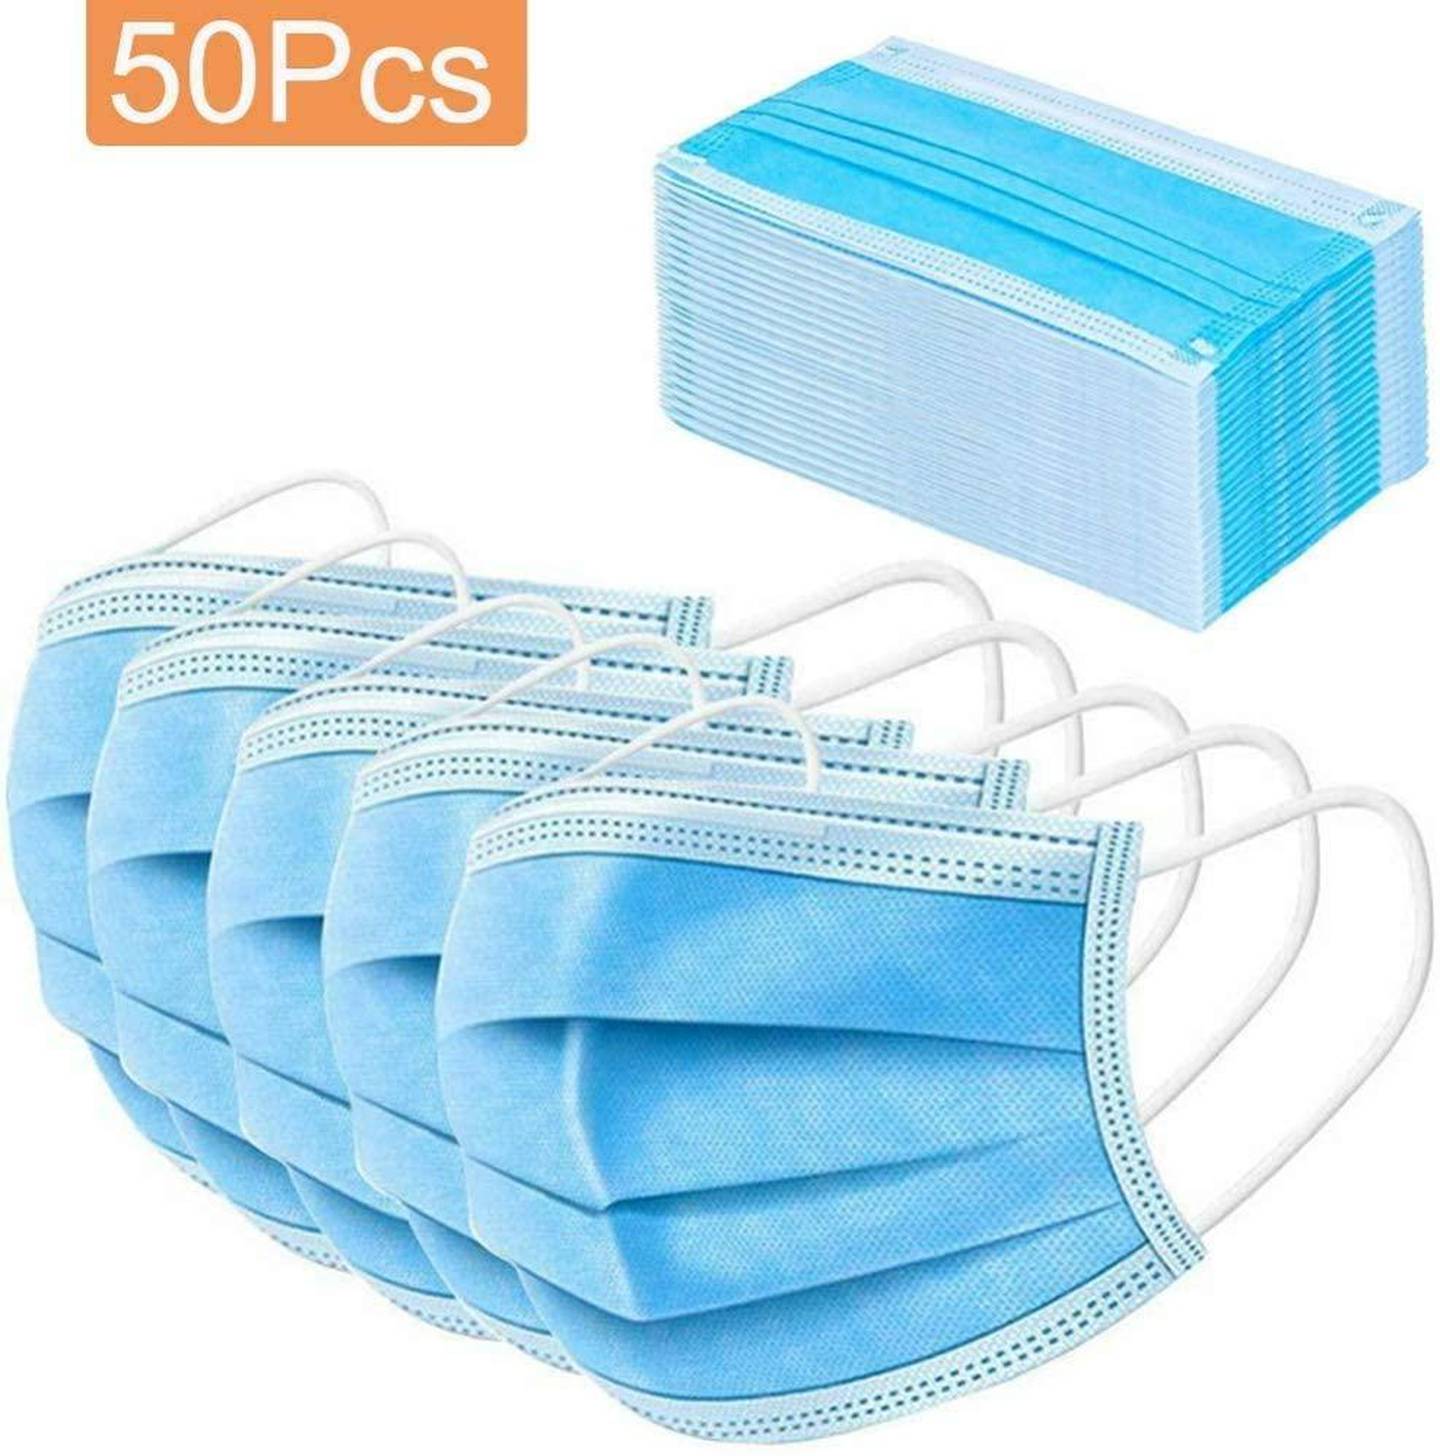 Surgical masks are available to buy on amazon.ae